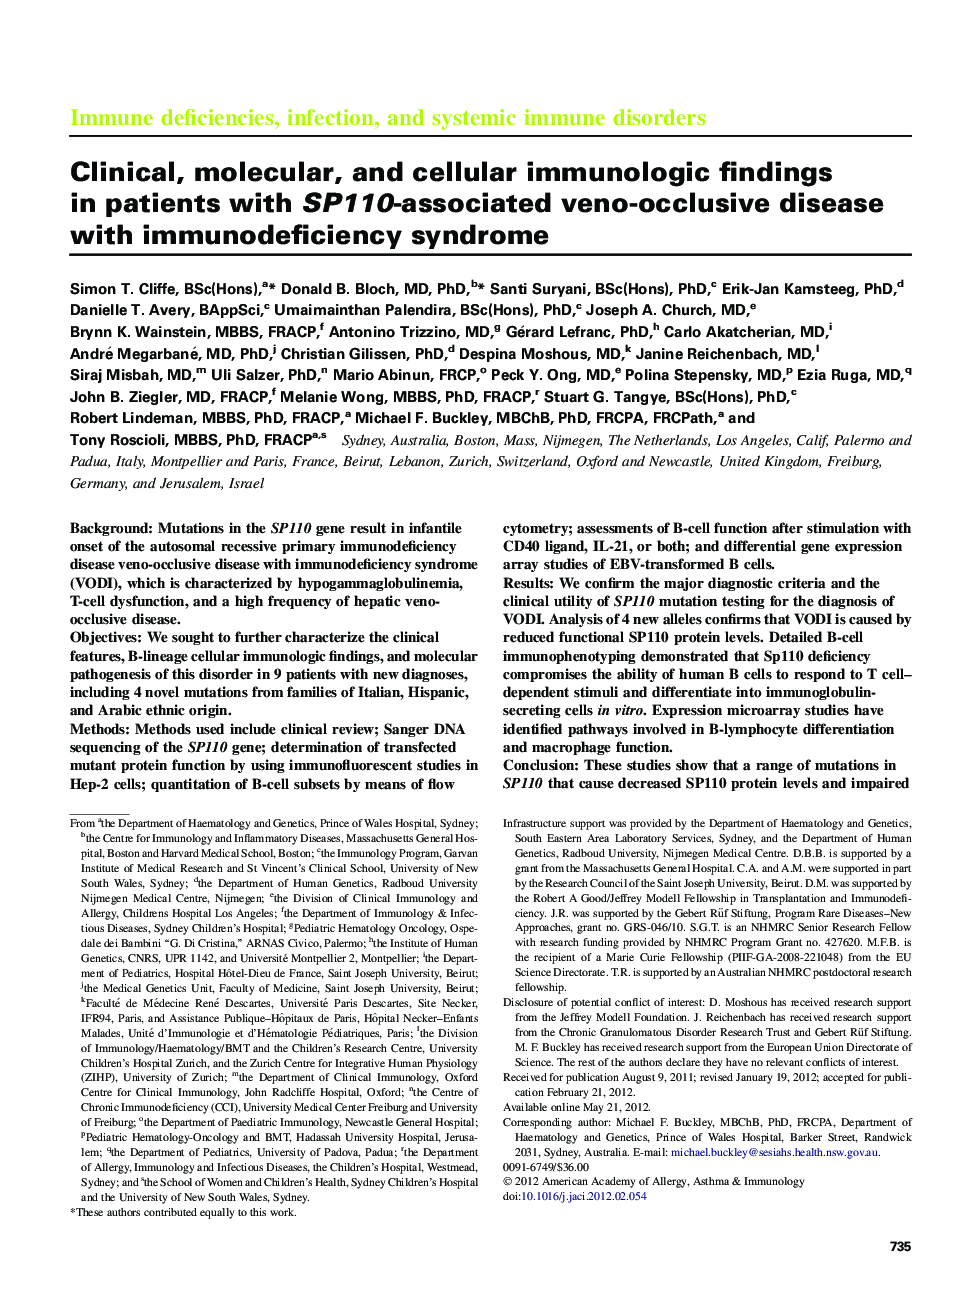 Clinical, molecular, and cellular immunologic findings in patients with SP110-associated veno-occlusive disease with immunodeficiency syndrome